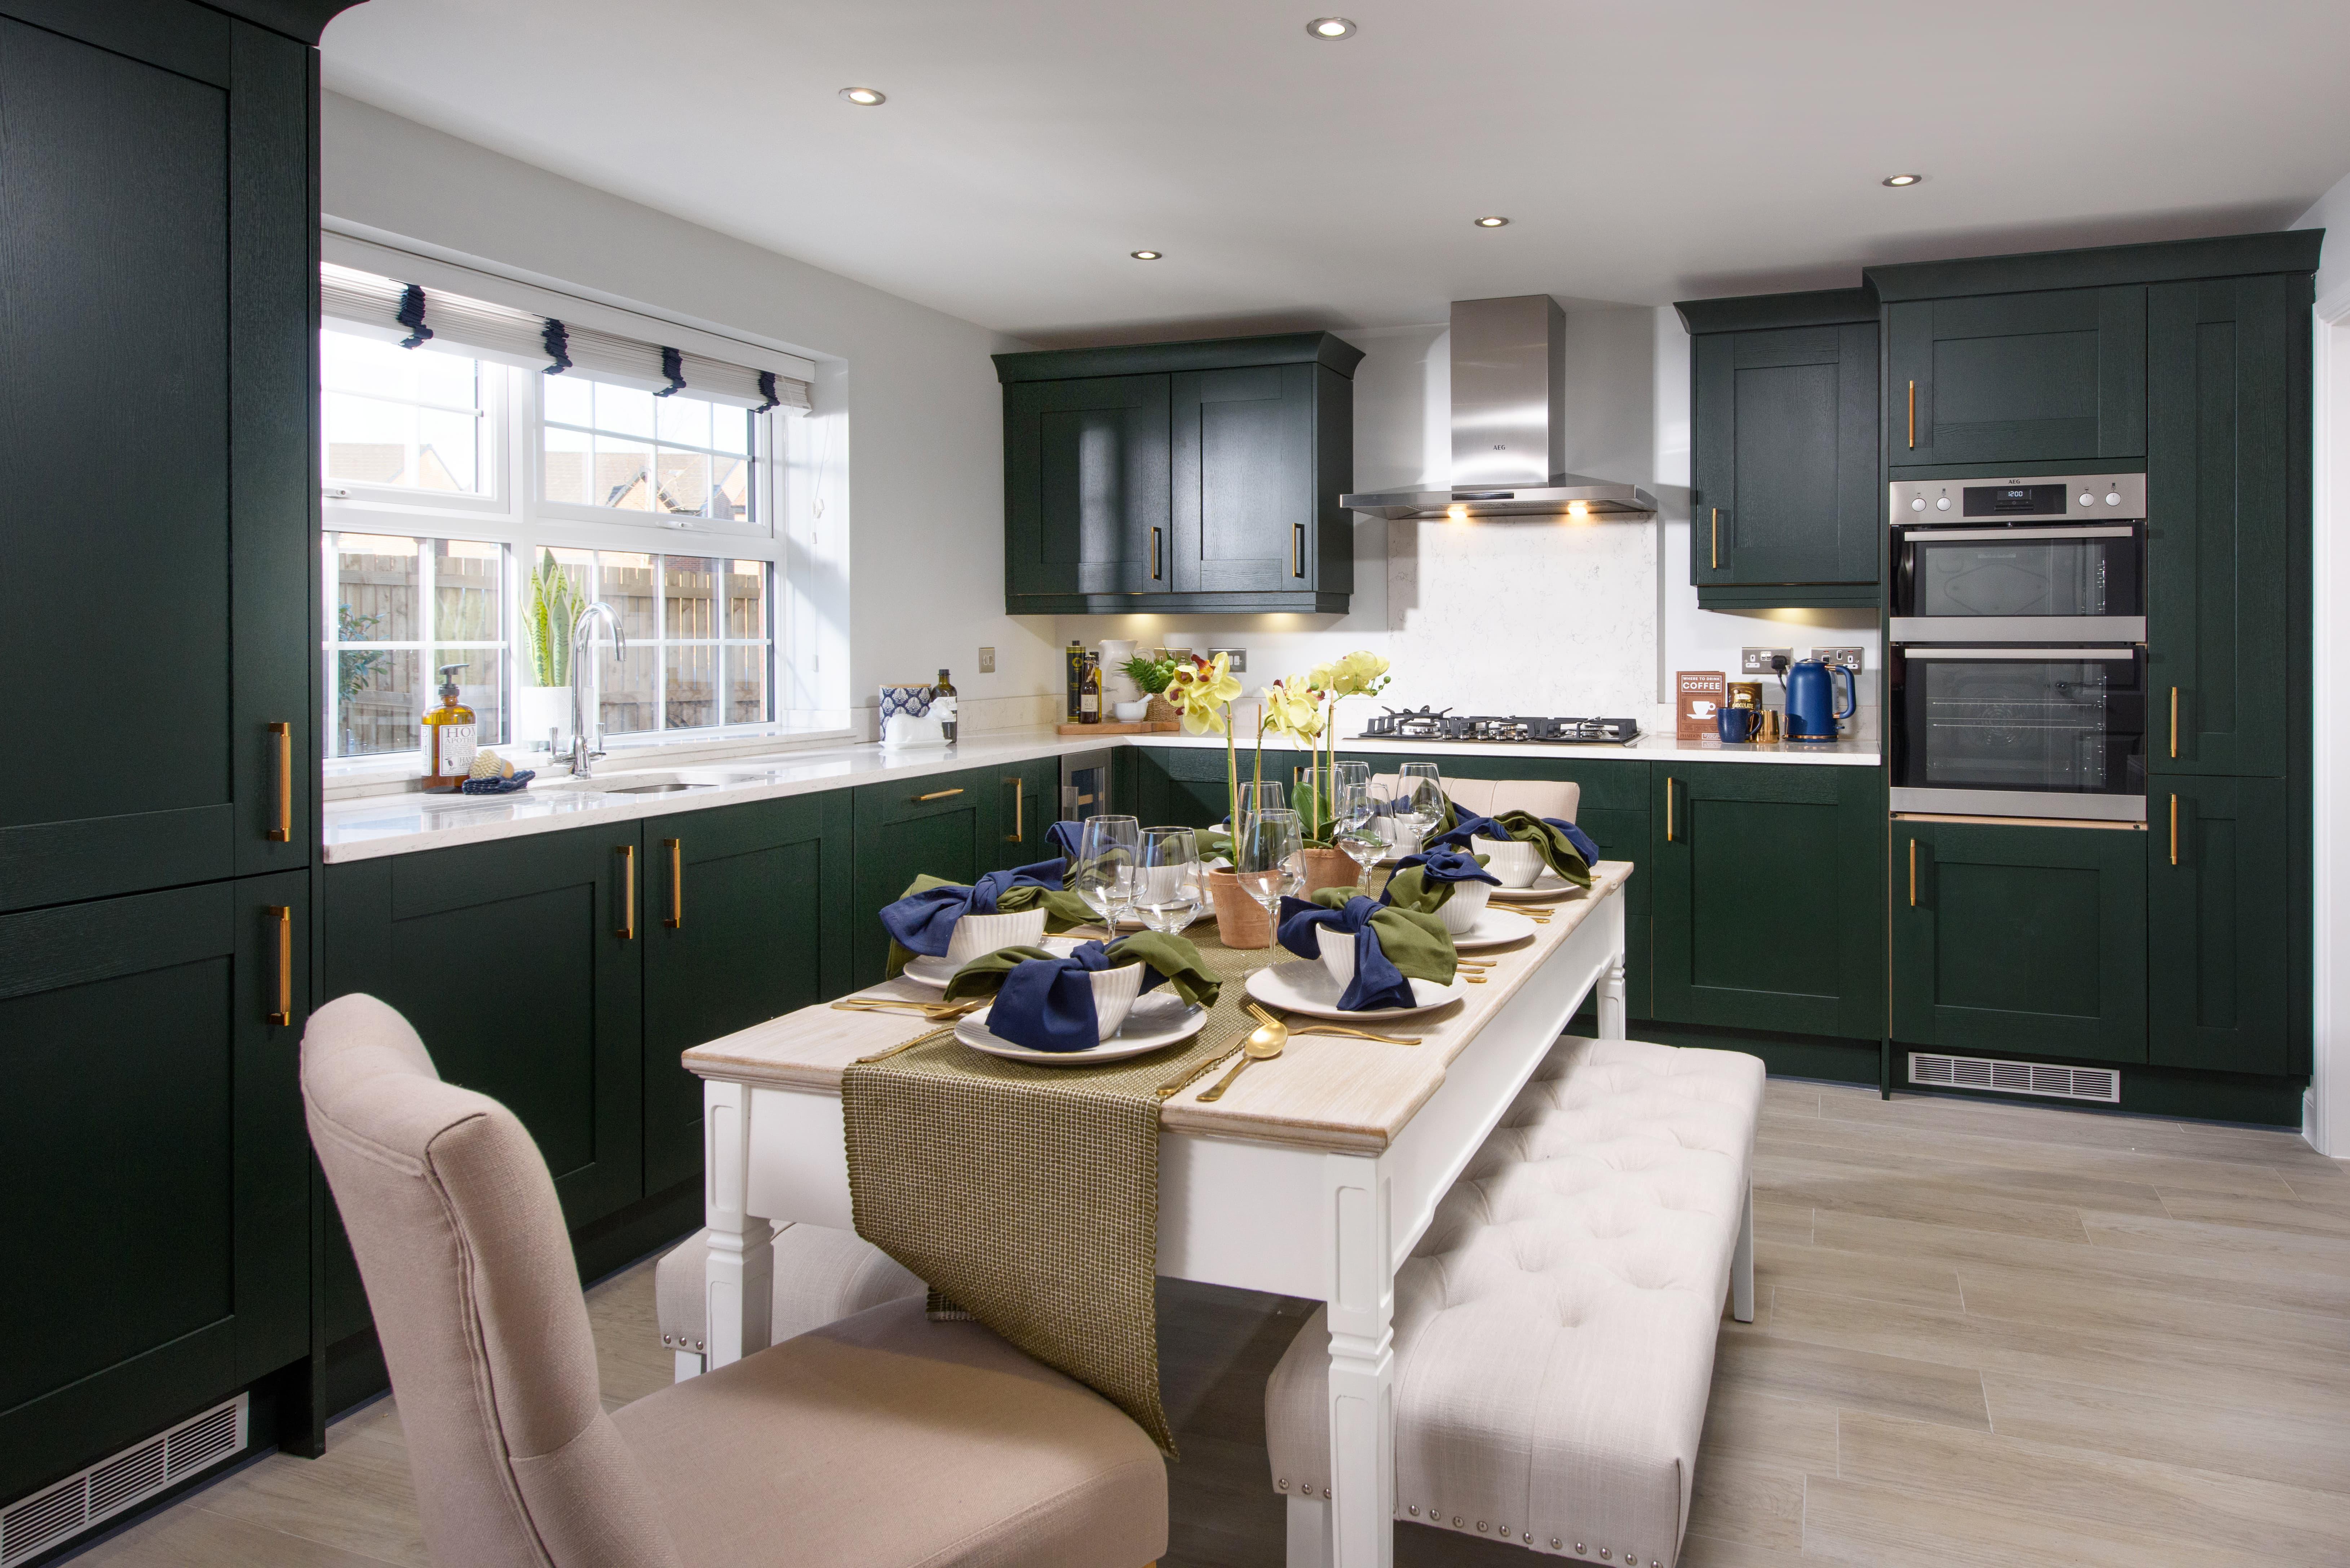 Images David Wilson Homes - The Orchard at West Park